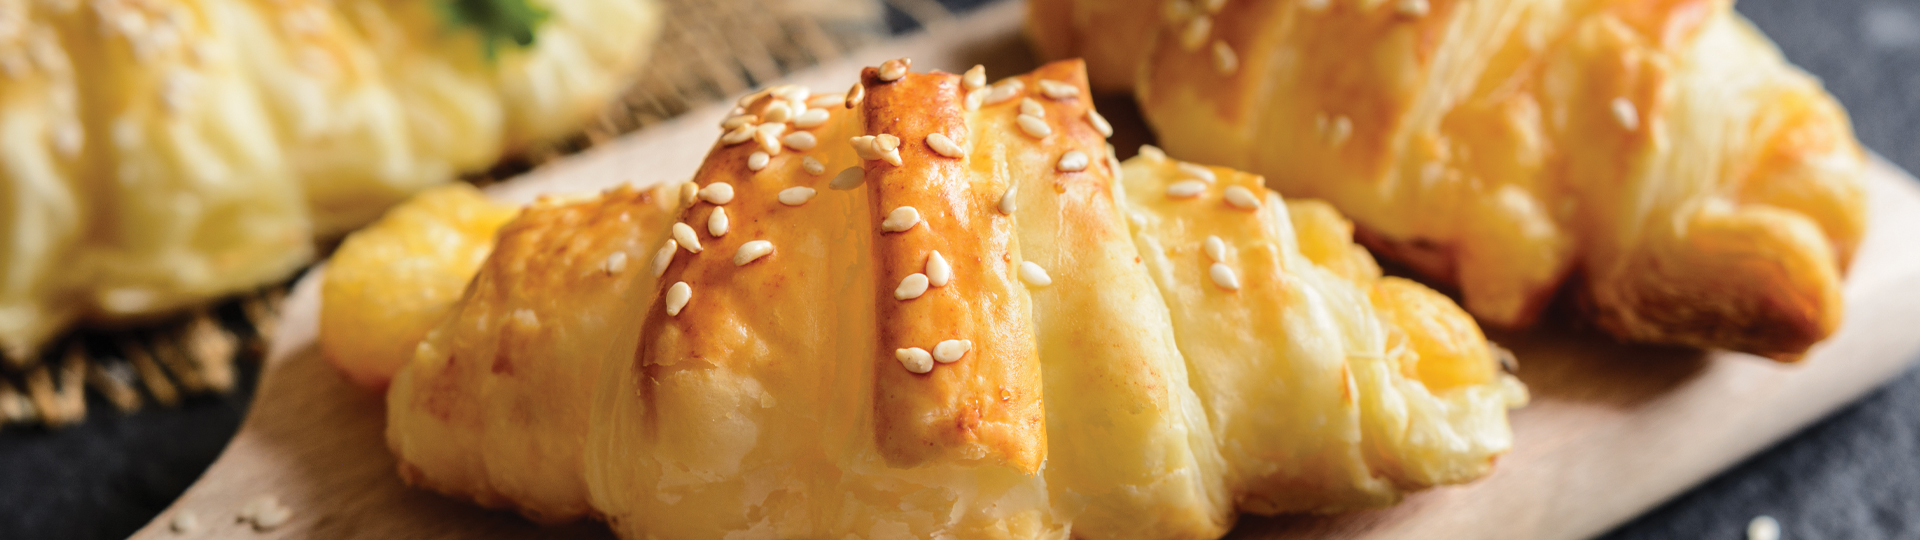 Baked croissants with sesame seed topping.